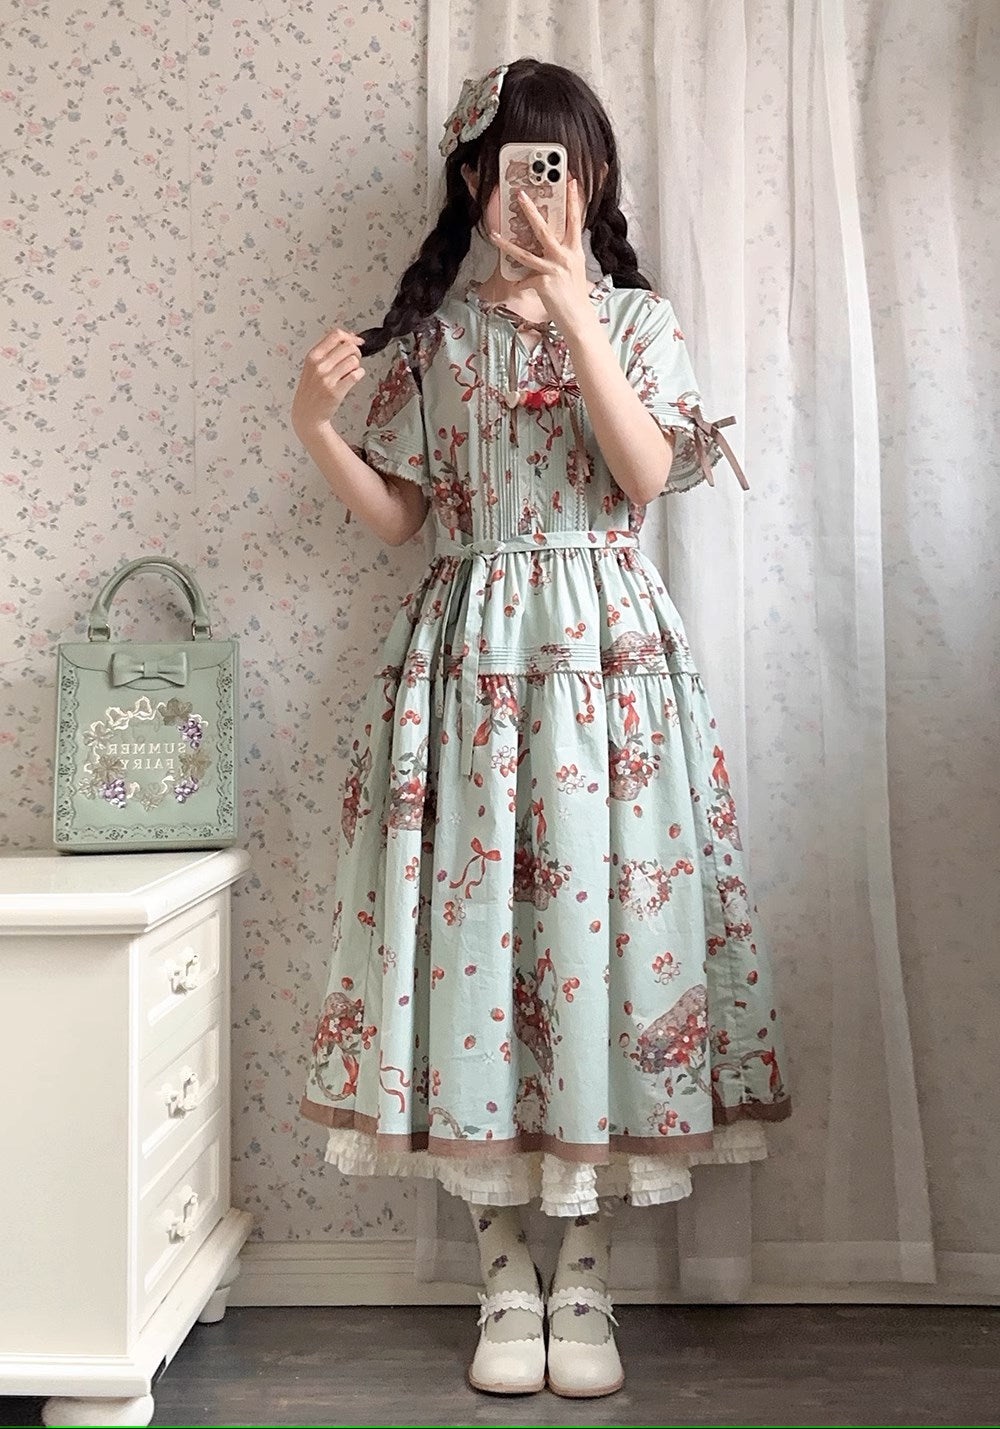 [Sales period ended] Picnic Basket One-piece dress, strawberry pattern